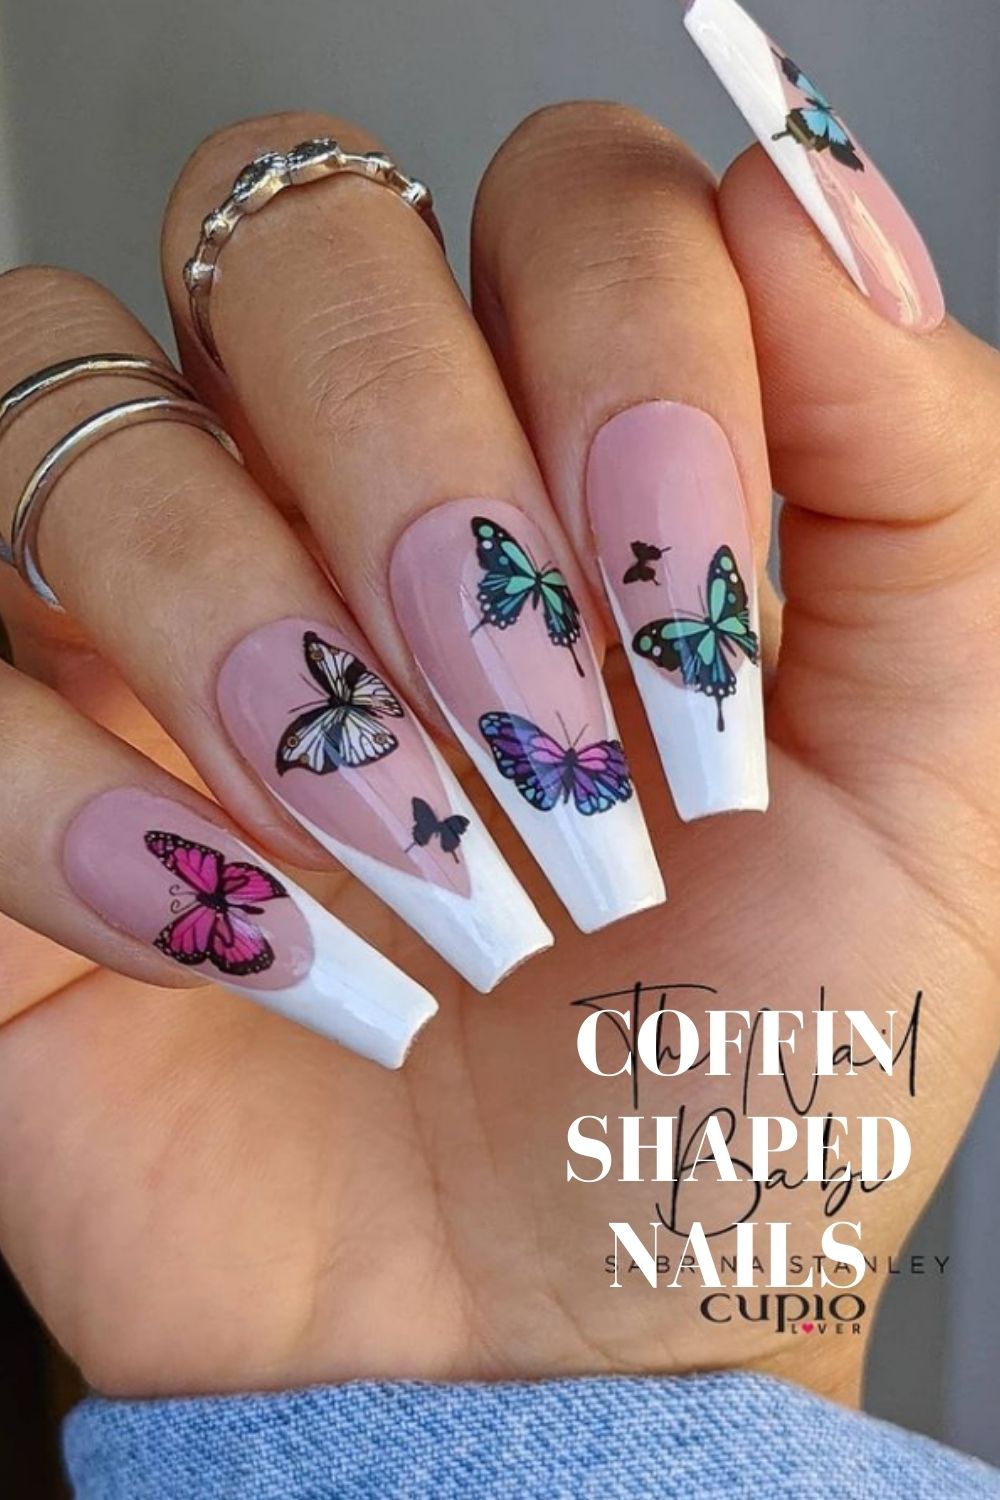 French tip coffin style nails